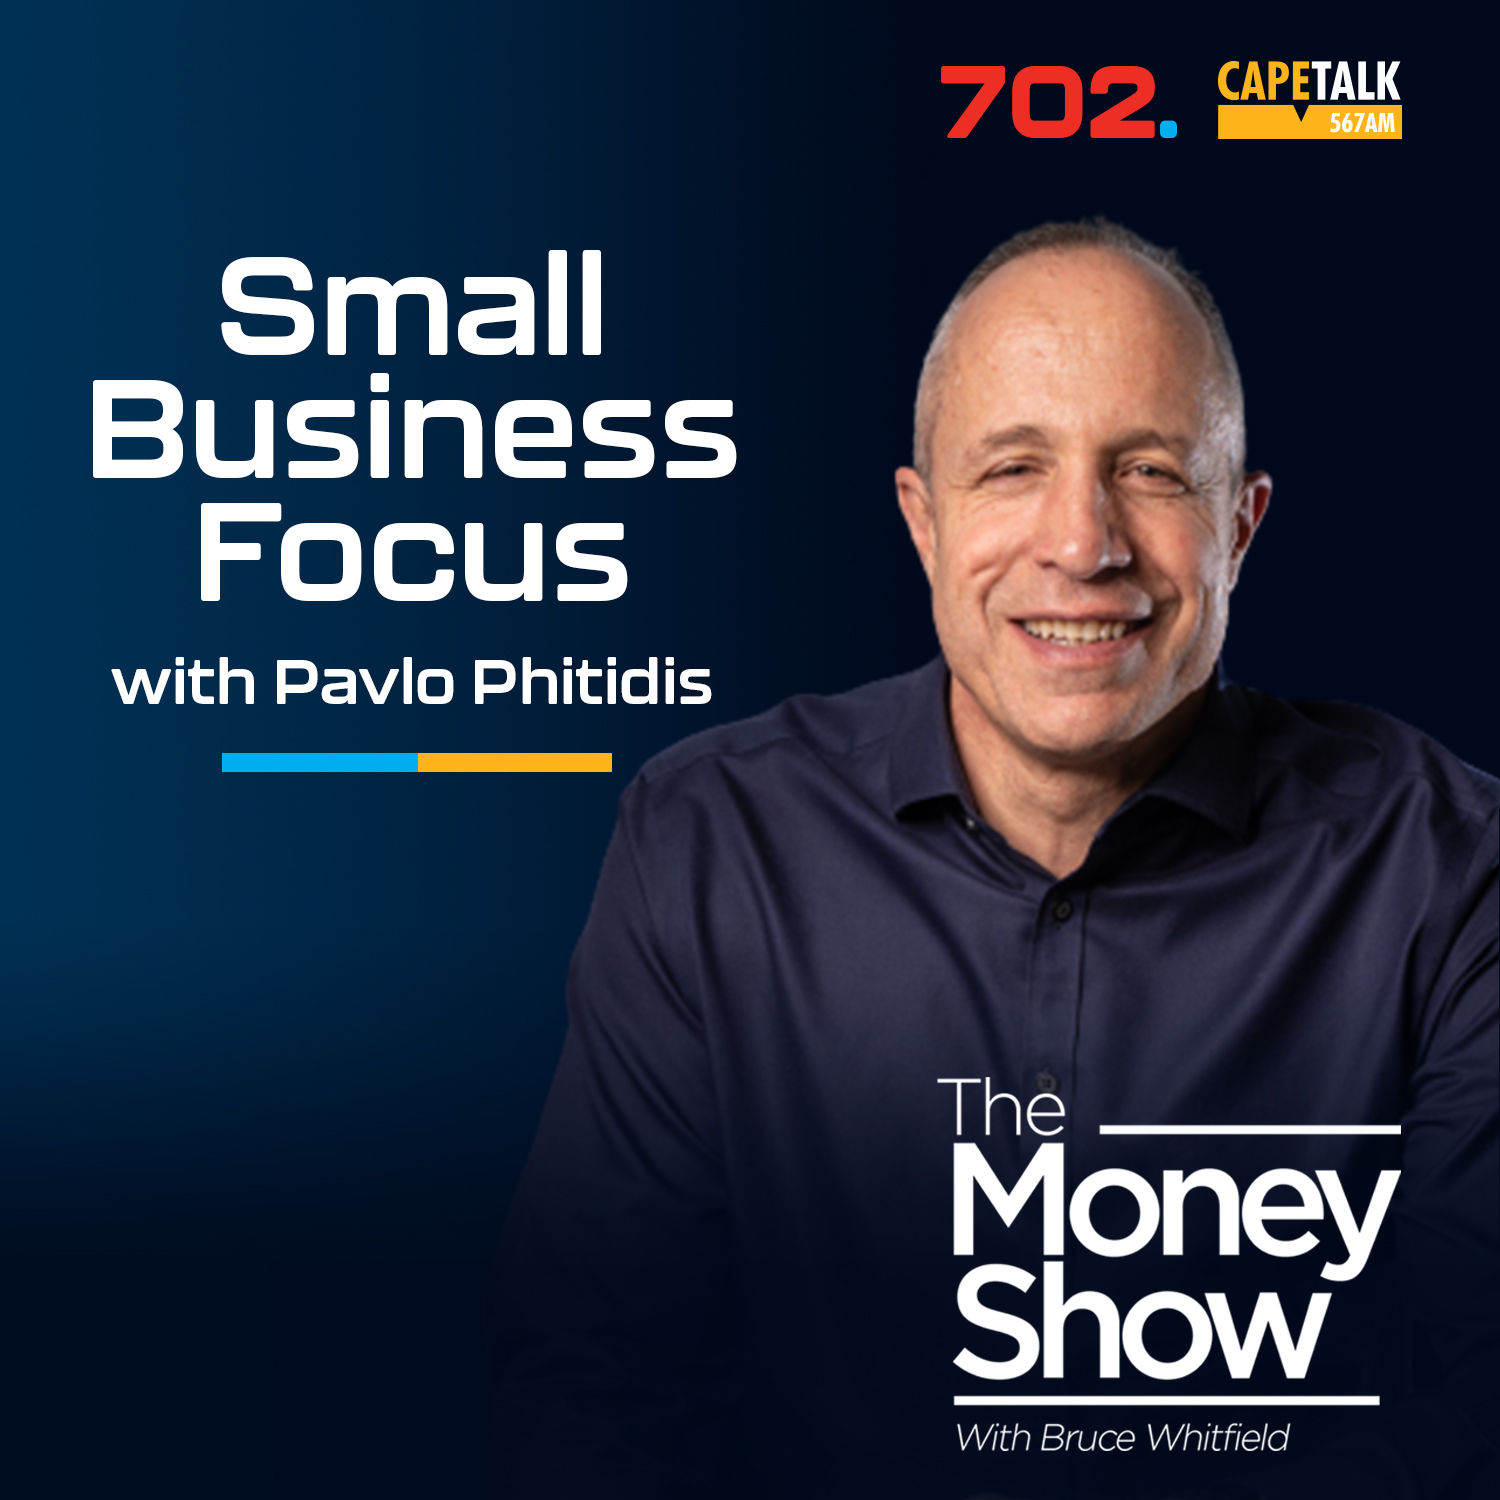 Small Business Focus - Liquidity moments over an entrepreneur's business career to get to a net worth of R100m